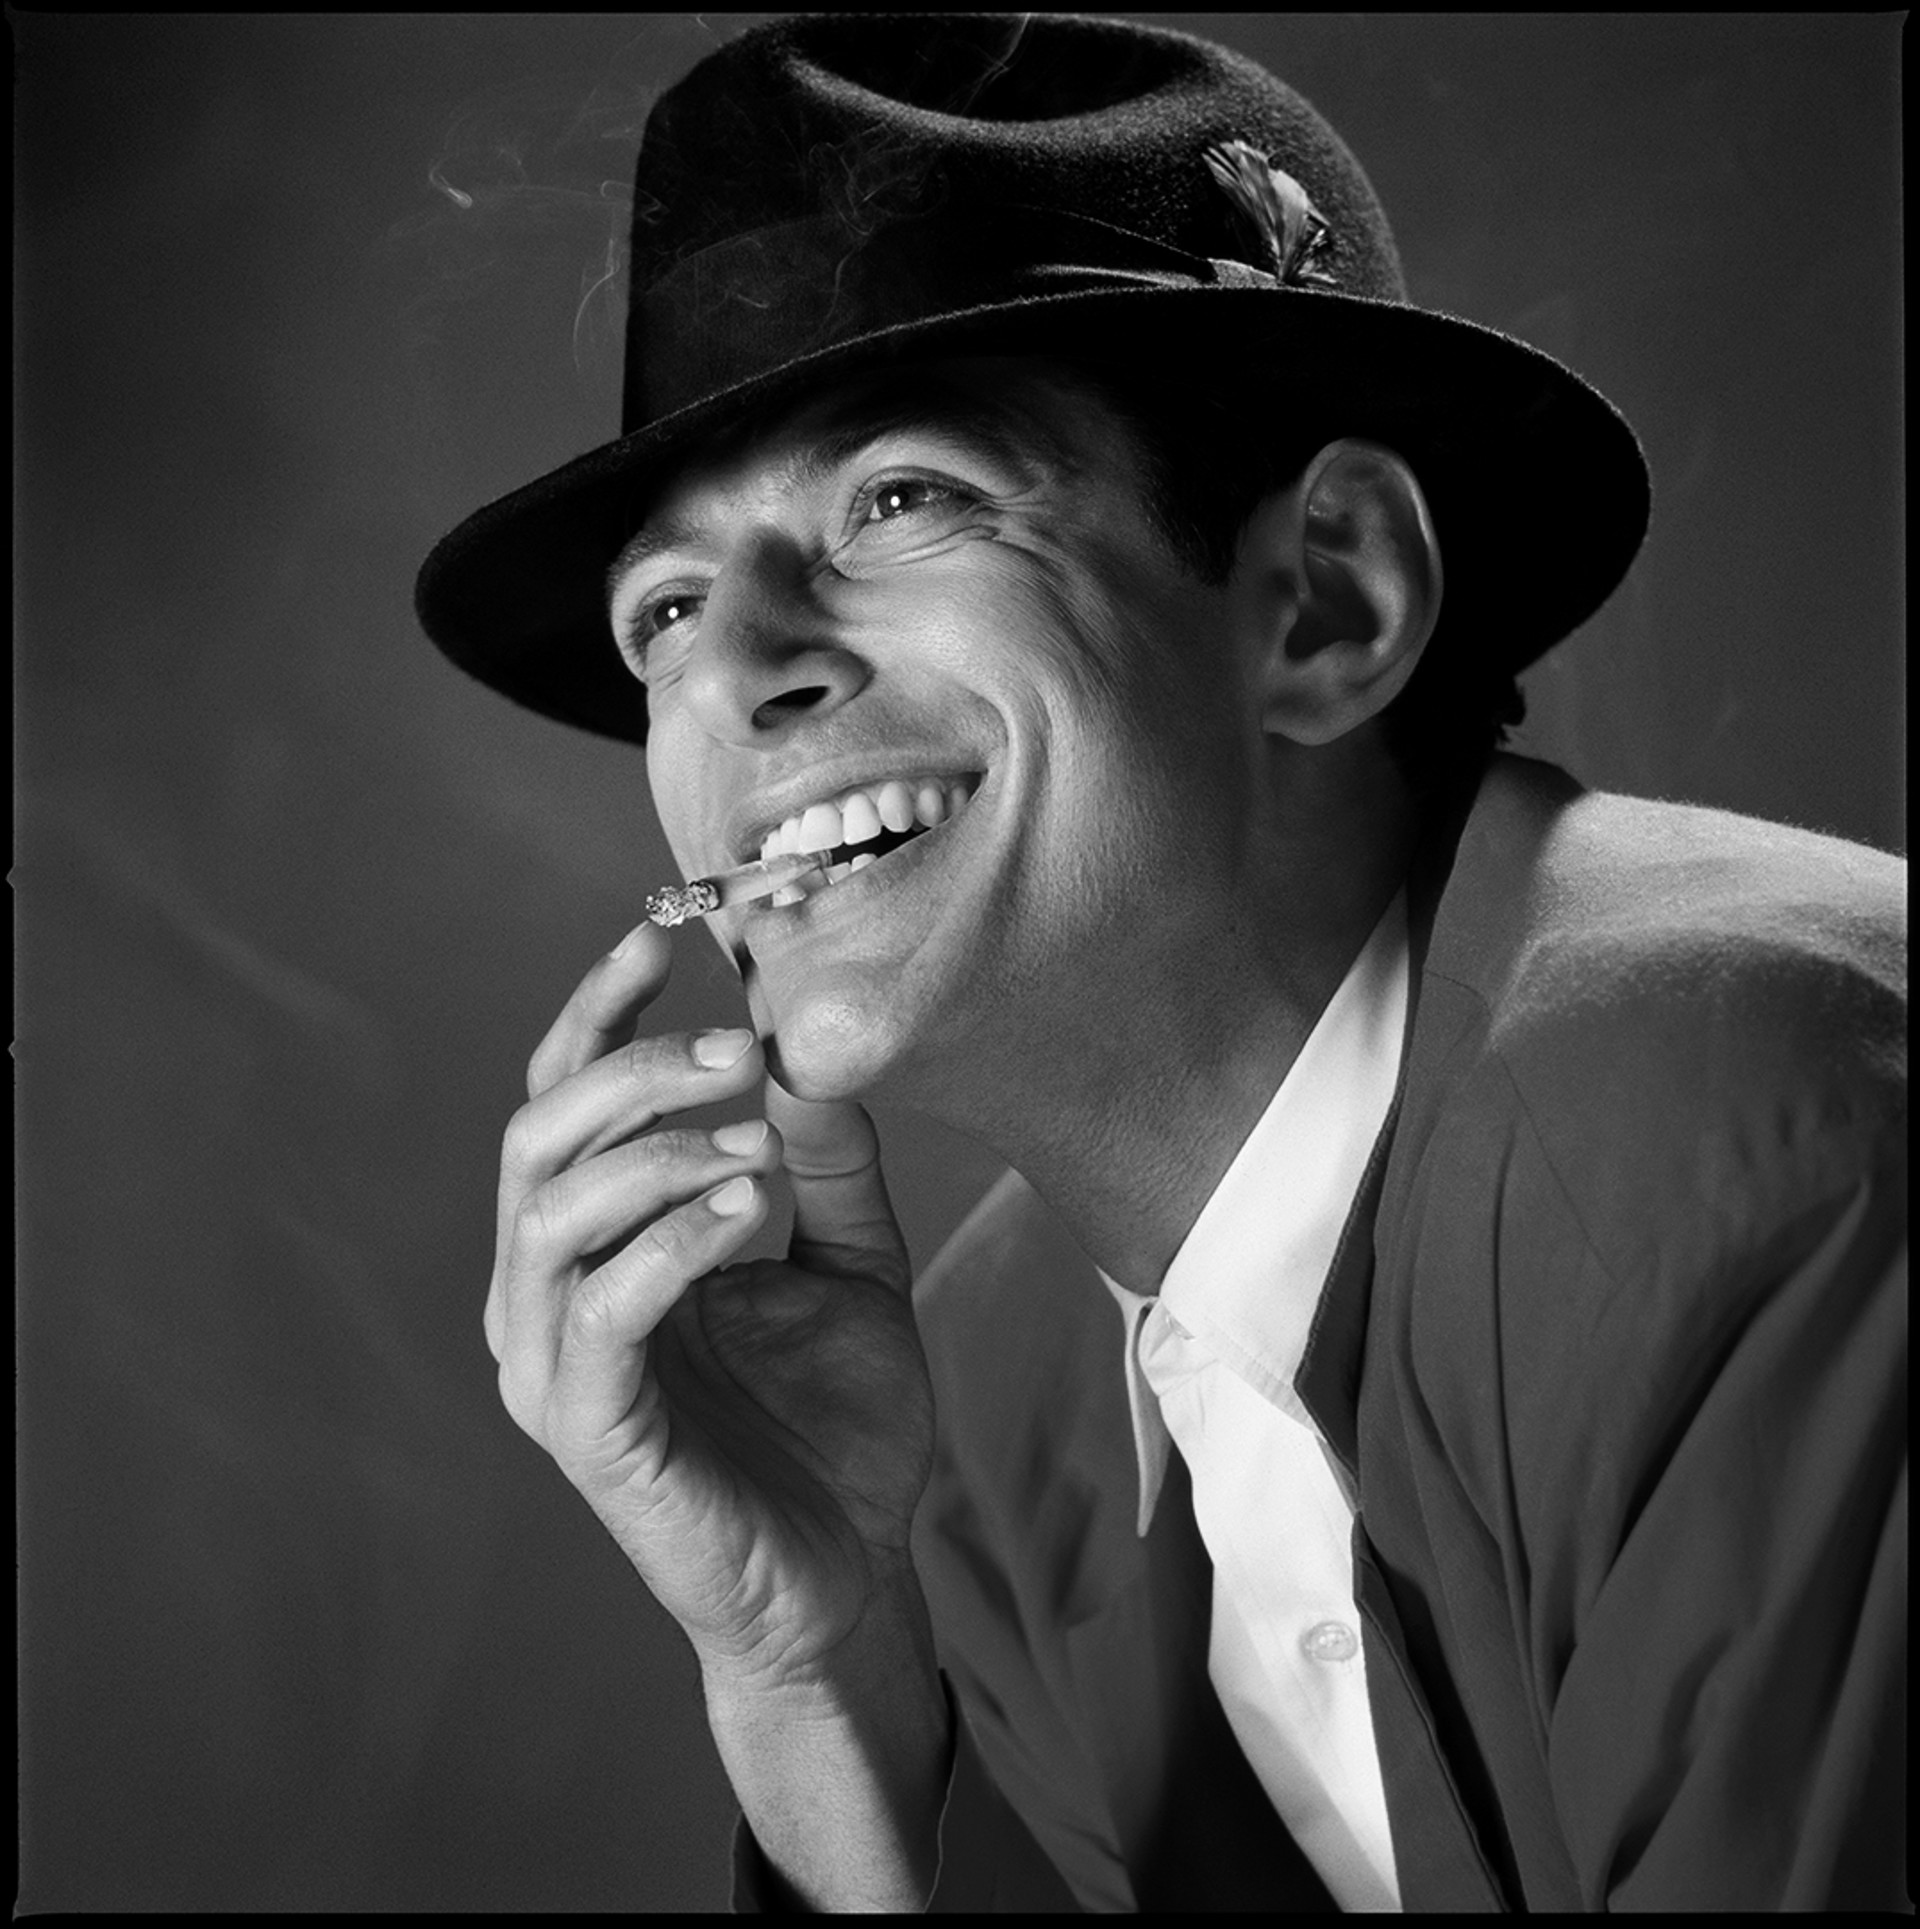 88007 Jeff Goldblum Smiling With Cigarette In Mouth BW by Timothy White